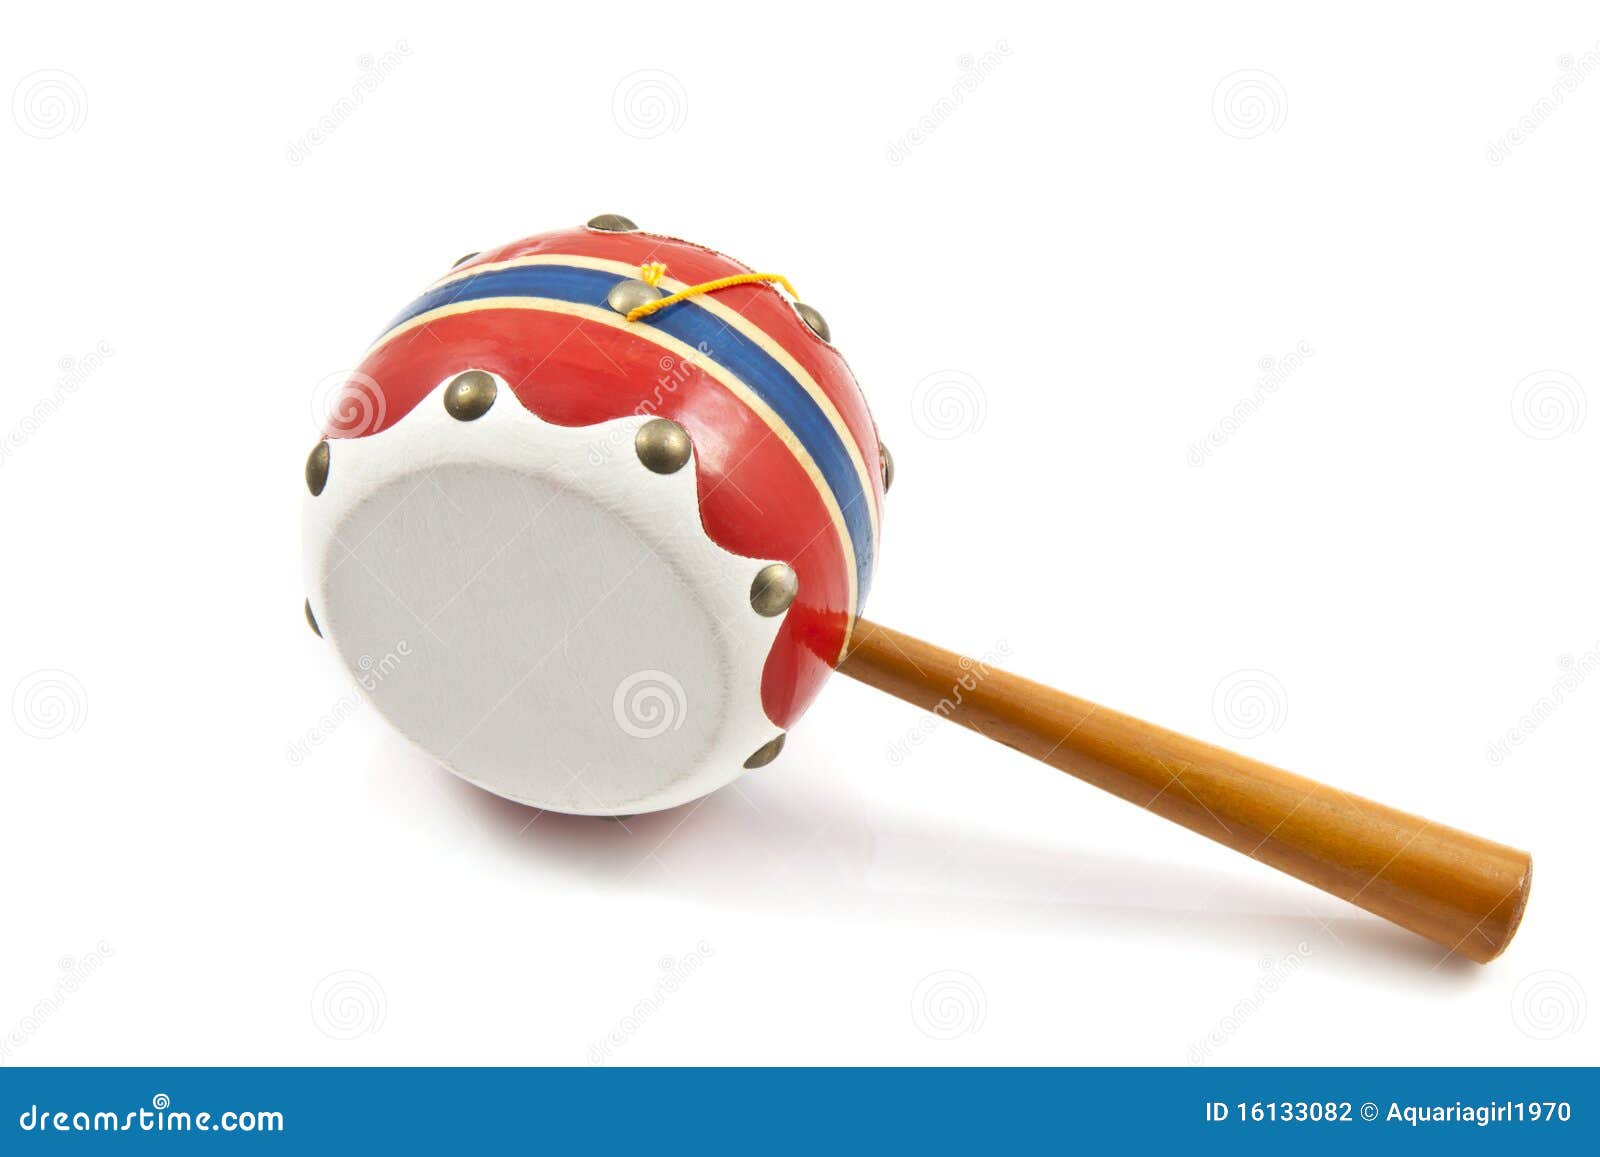 little percussion musical instrument